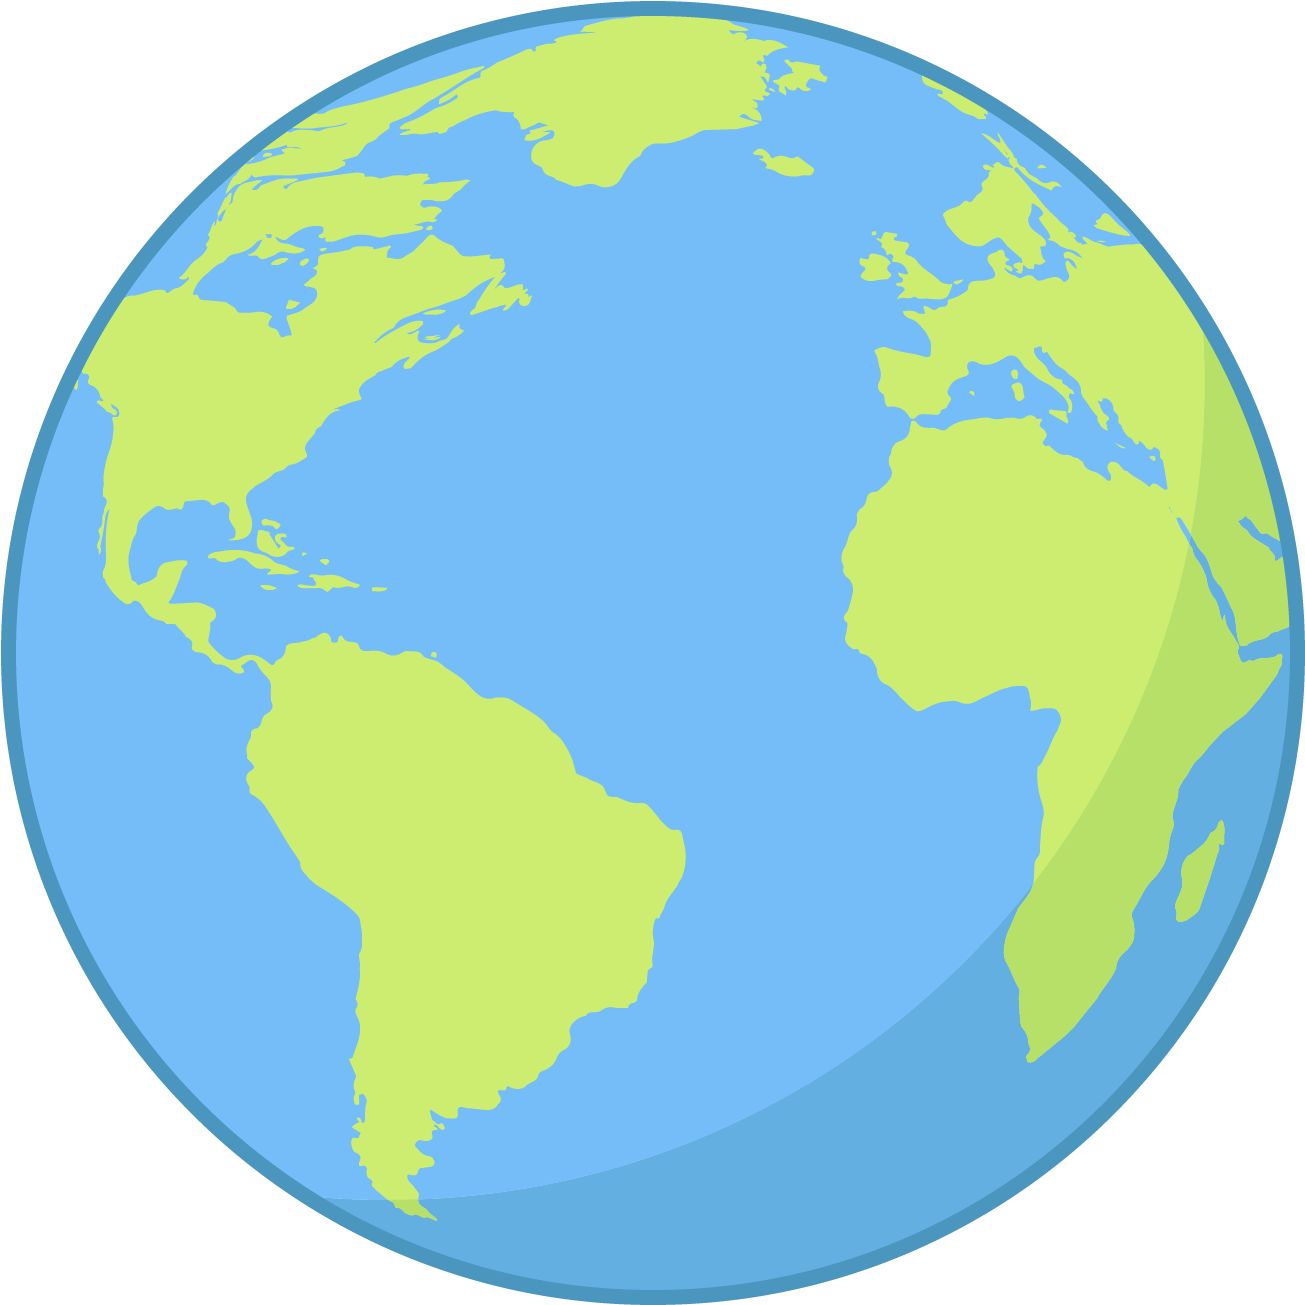 clipart about Image Is Not Available - Continents On Globe, Find more high ...